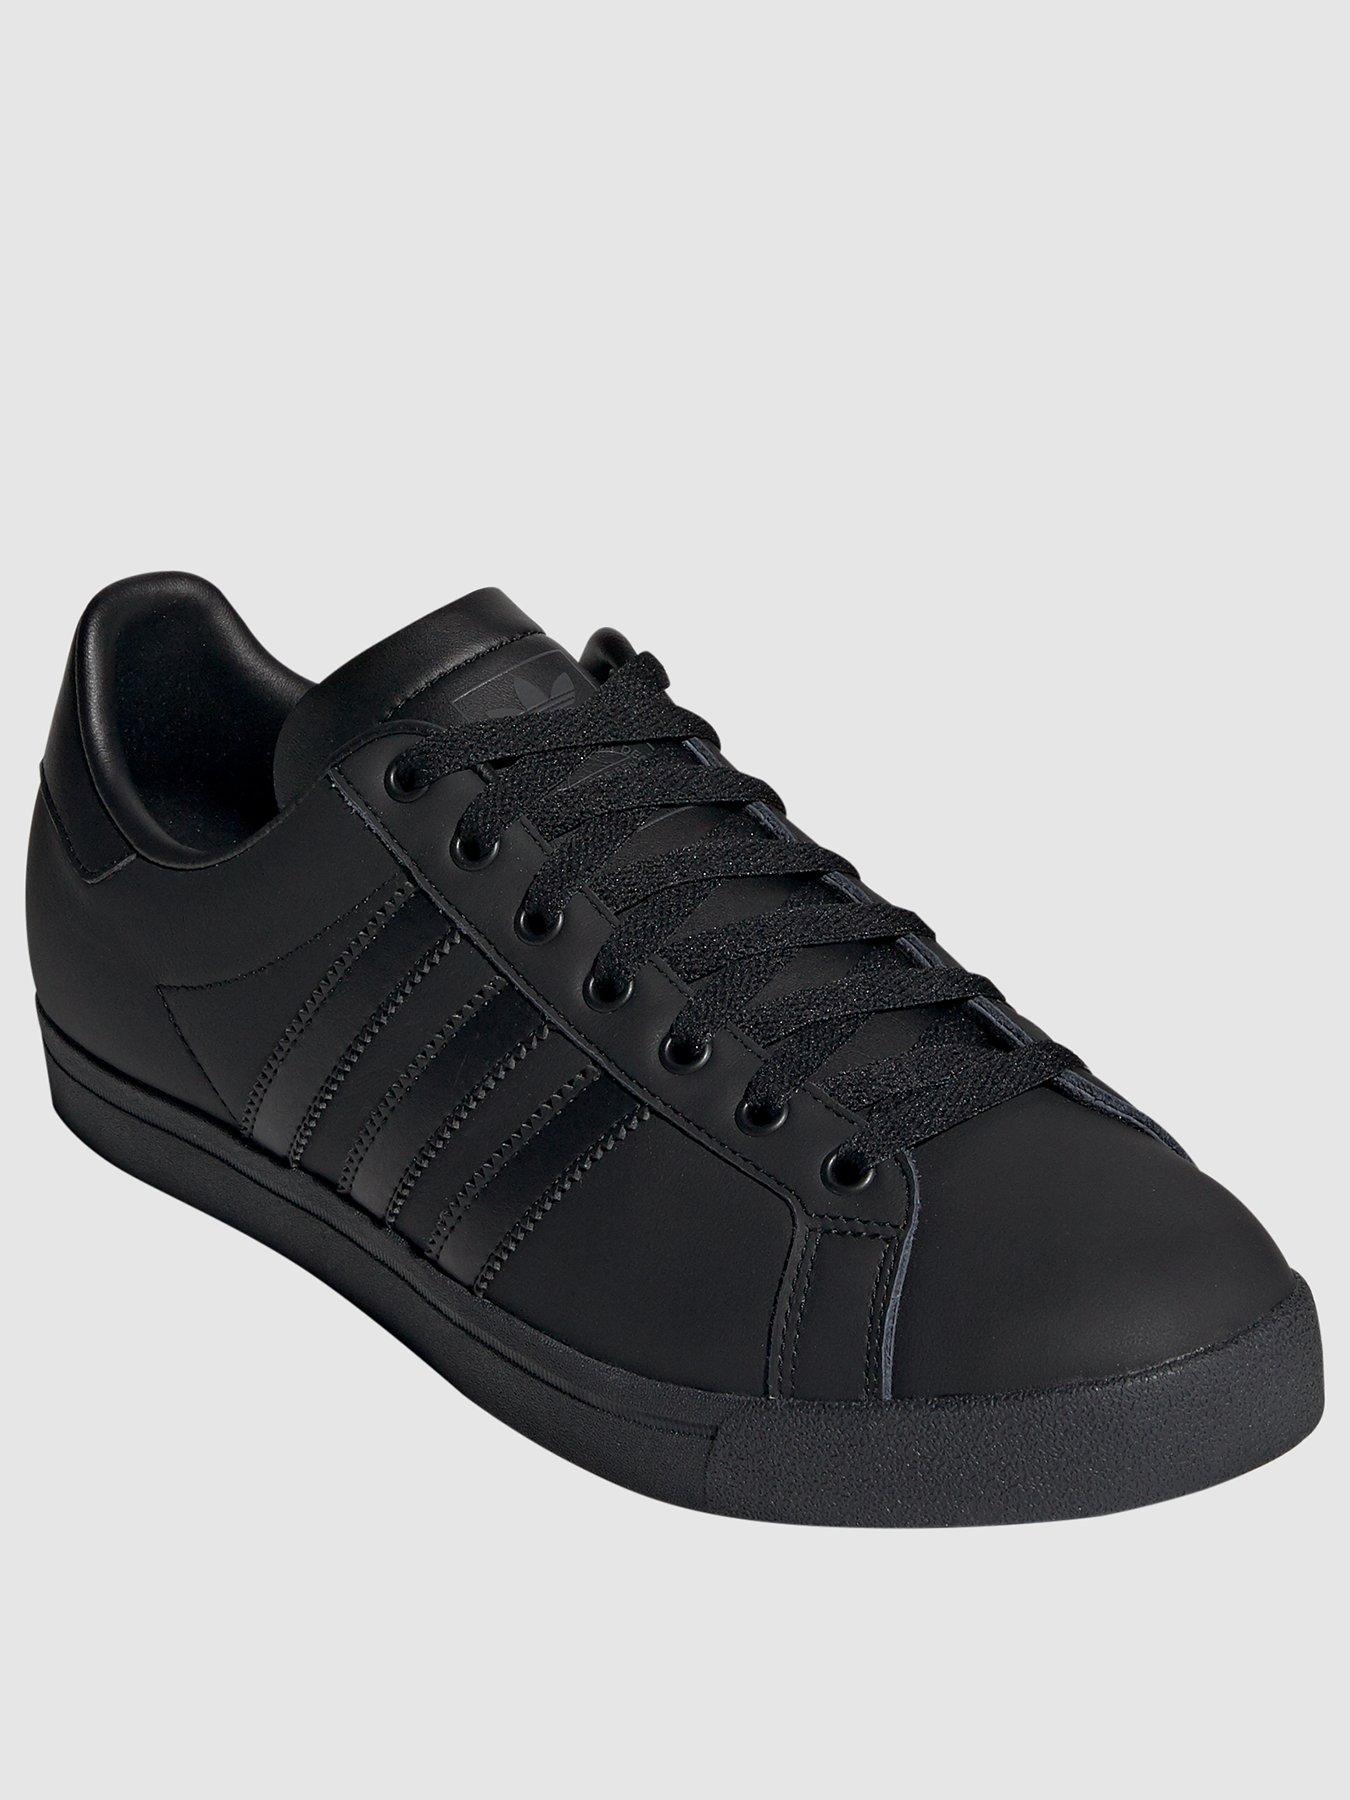 adidas black trainers size 3